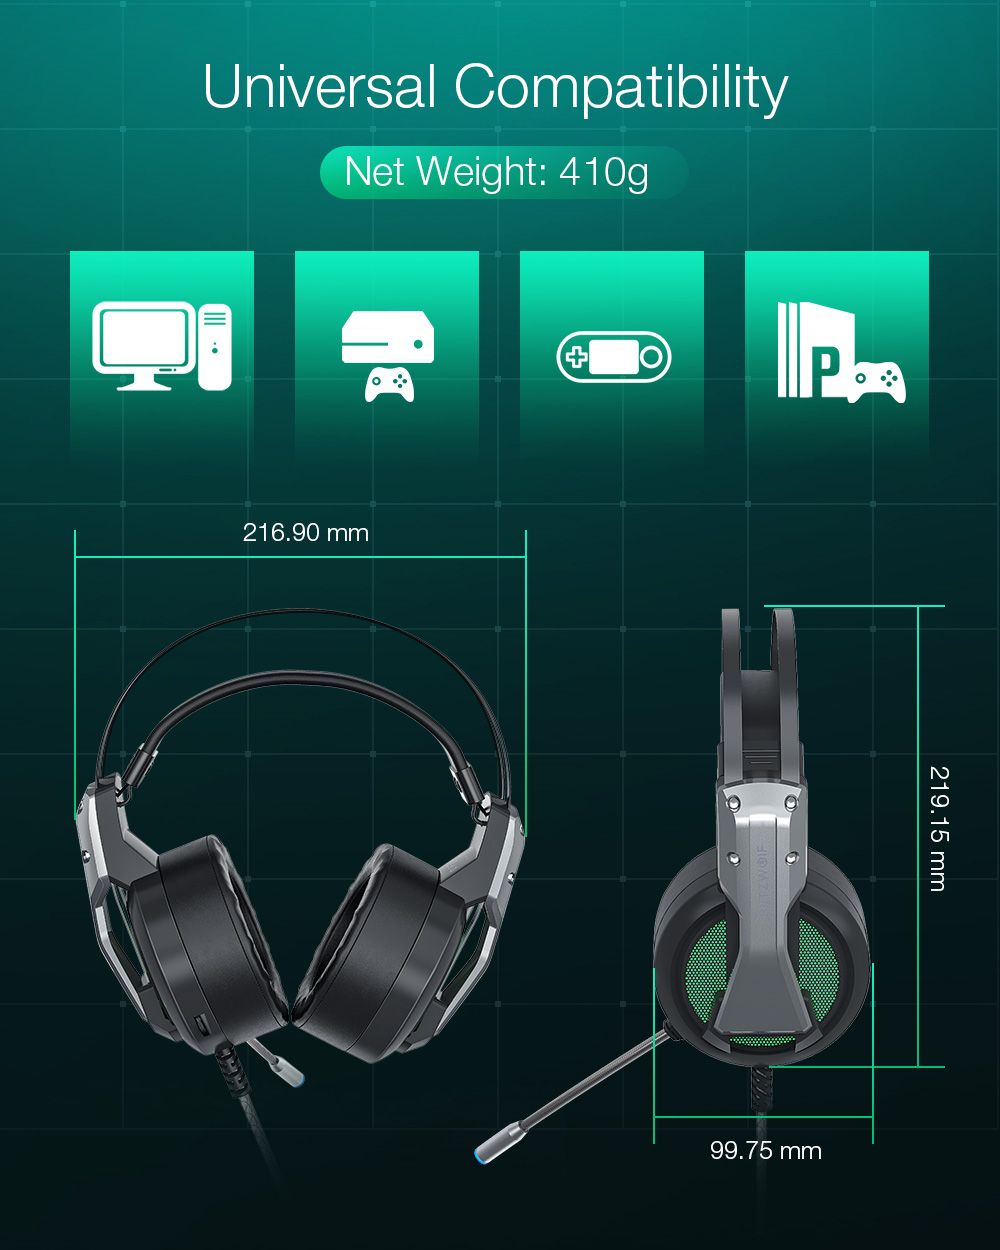 BlitzWolfreg-BW-GH1-Gaming-Headphone-71-Surround-Sound-Bass-RGB-Game-Headset-with-Mic-for-Computer-P-1689435